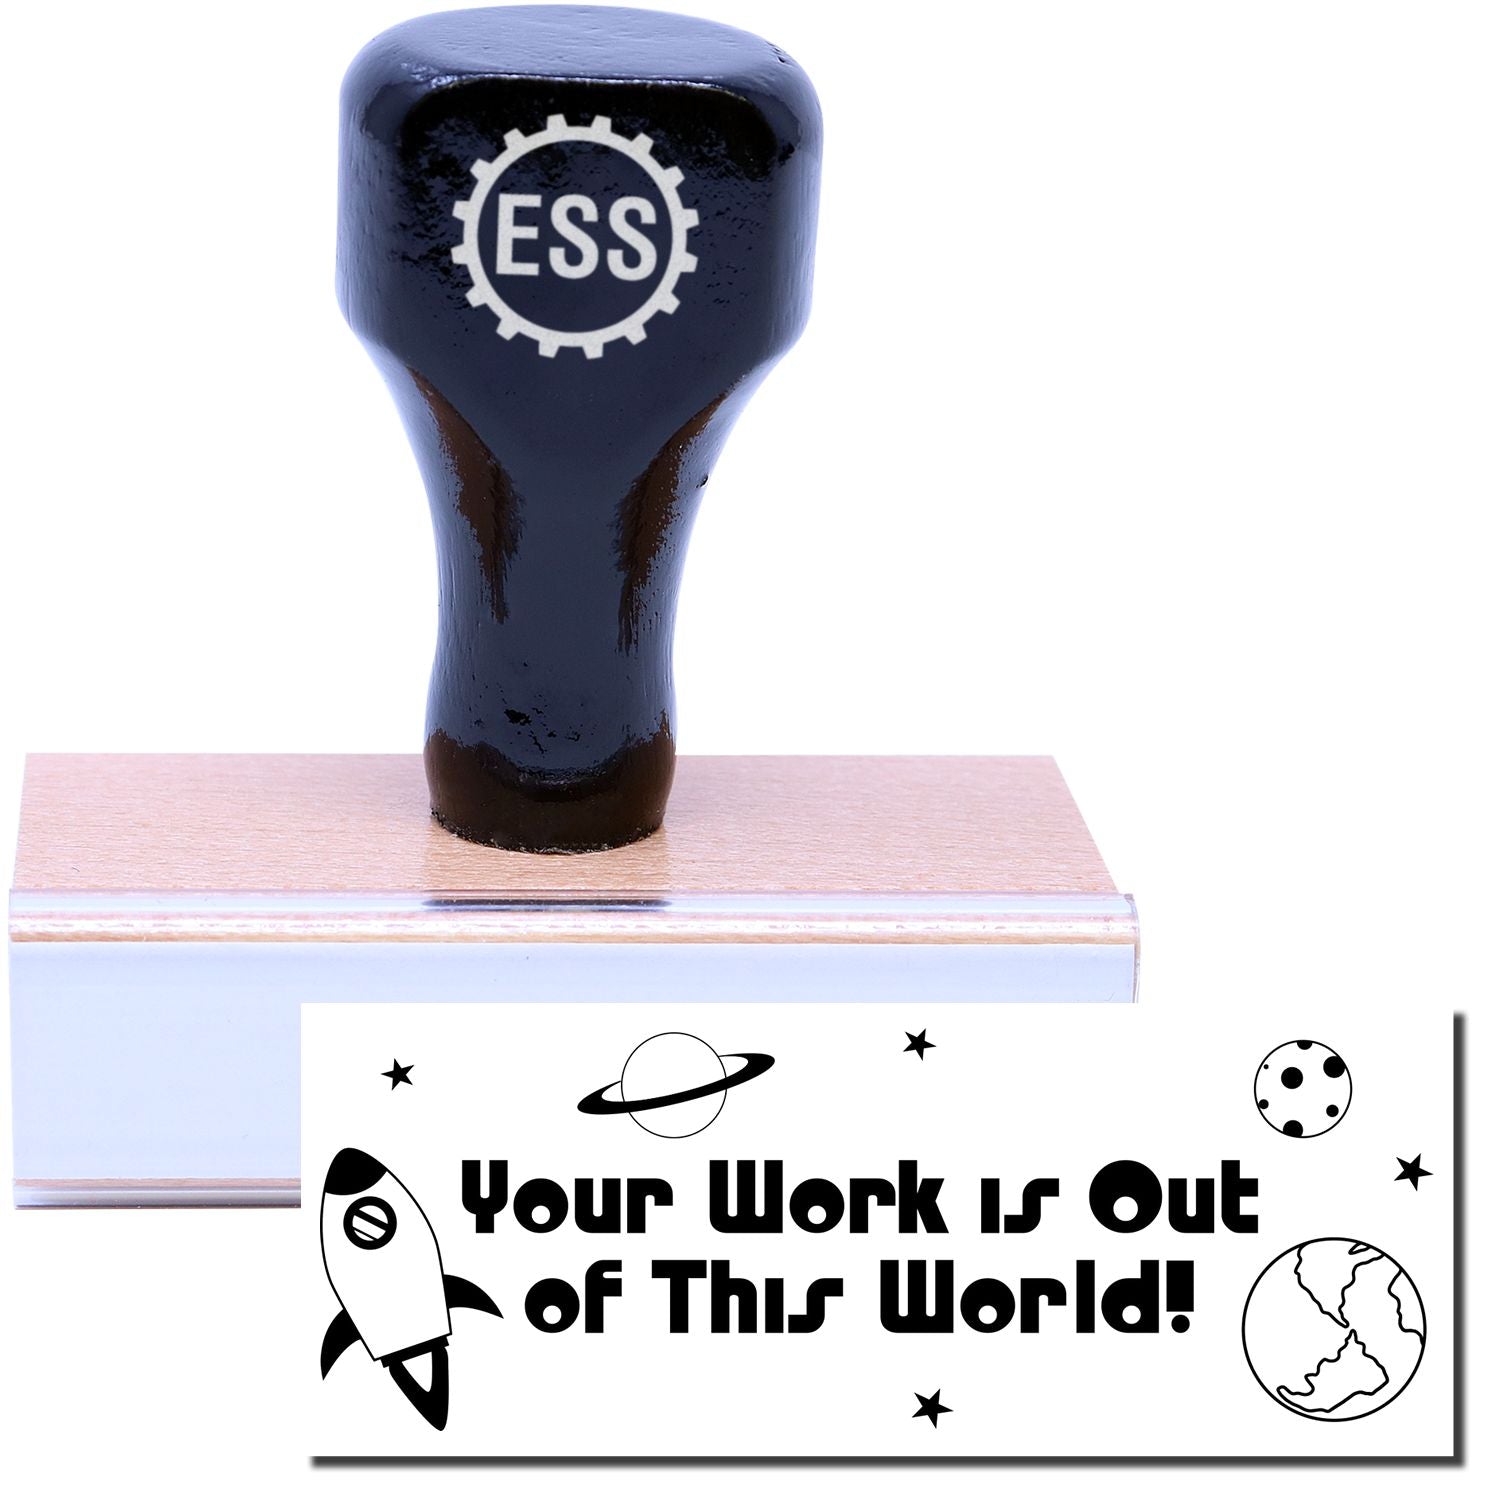 A stock office rubber stamp with a stamped image showing how the text "Your Work is Out of This World!" in a unique font with a space-themed design is displayed after stamping.